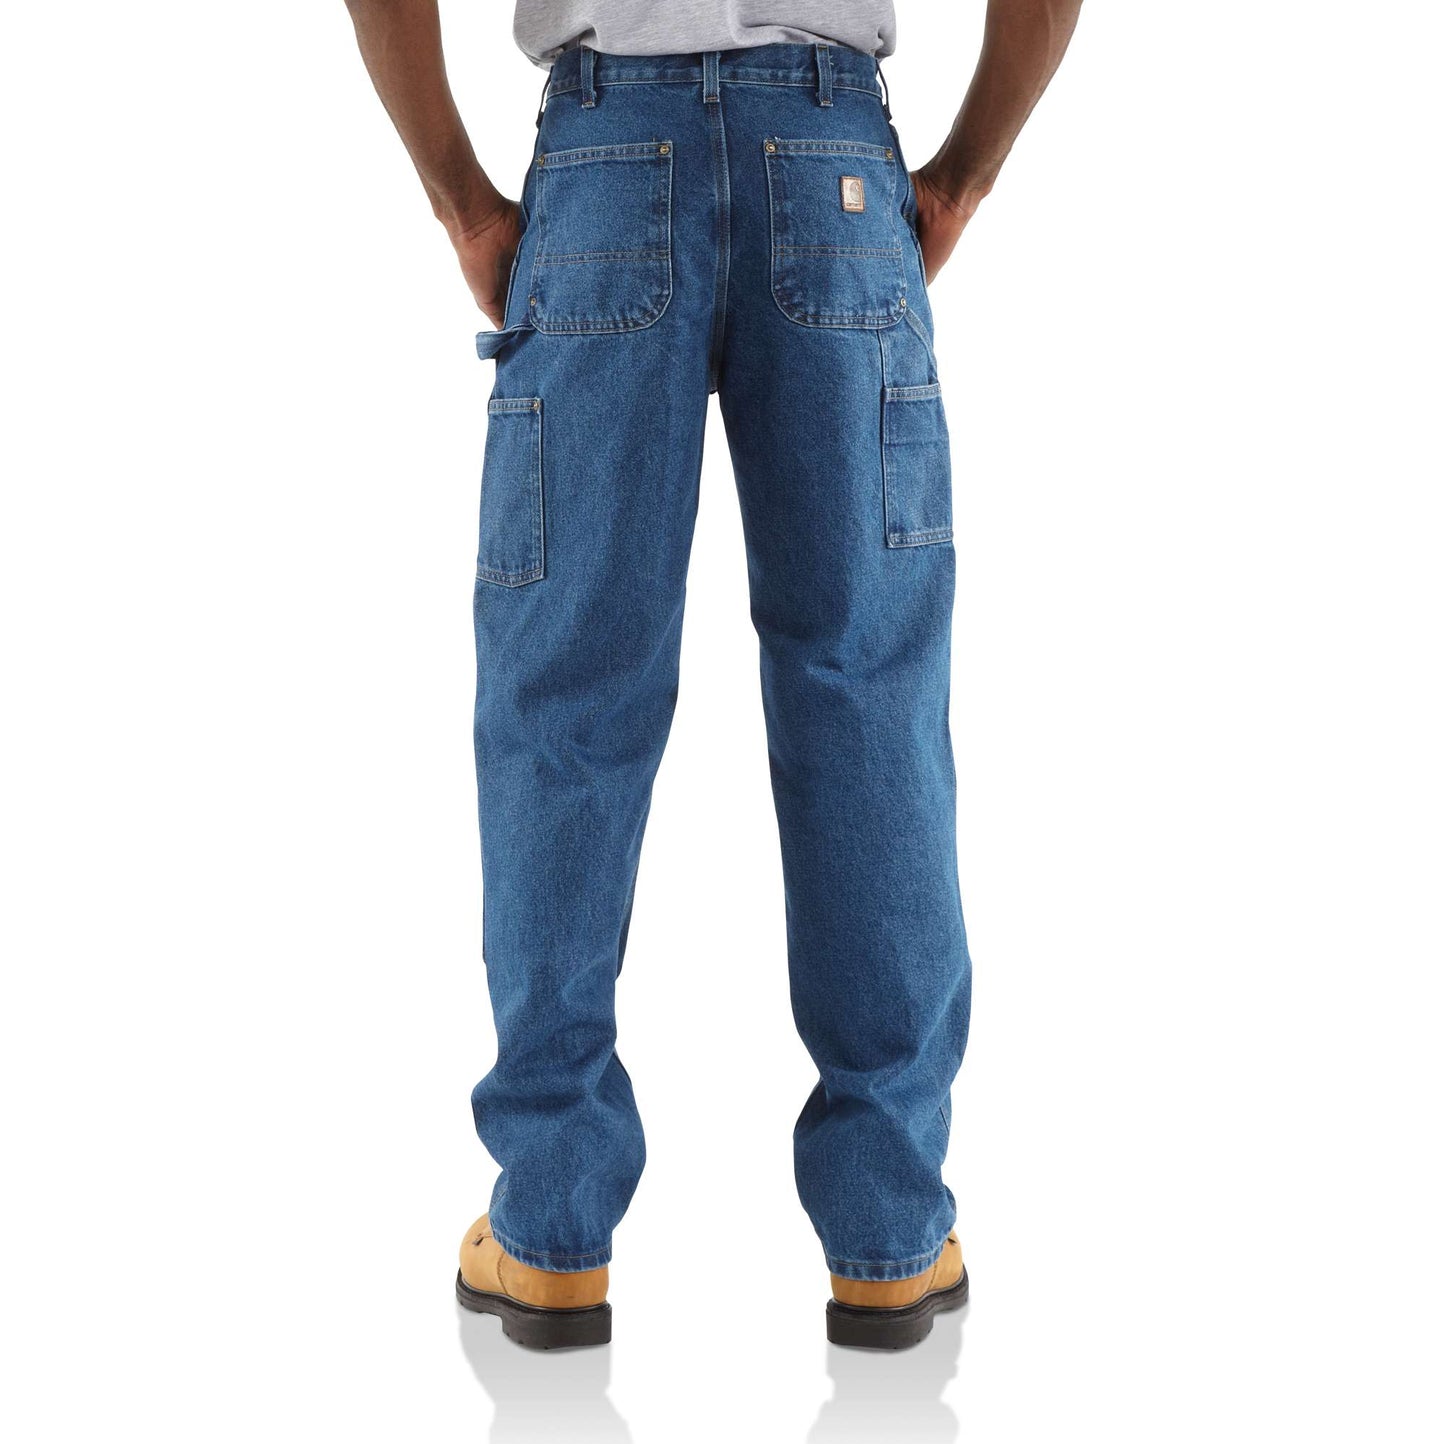 Loose / Original-Fit Washed Logger Double-Front Work Jean